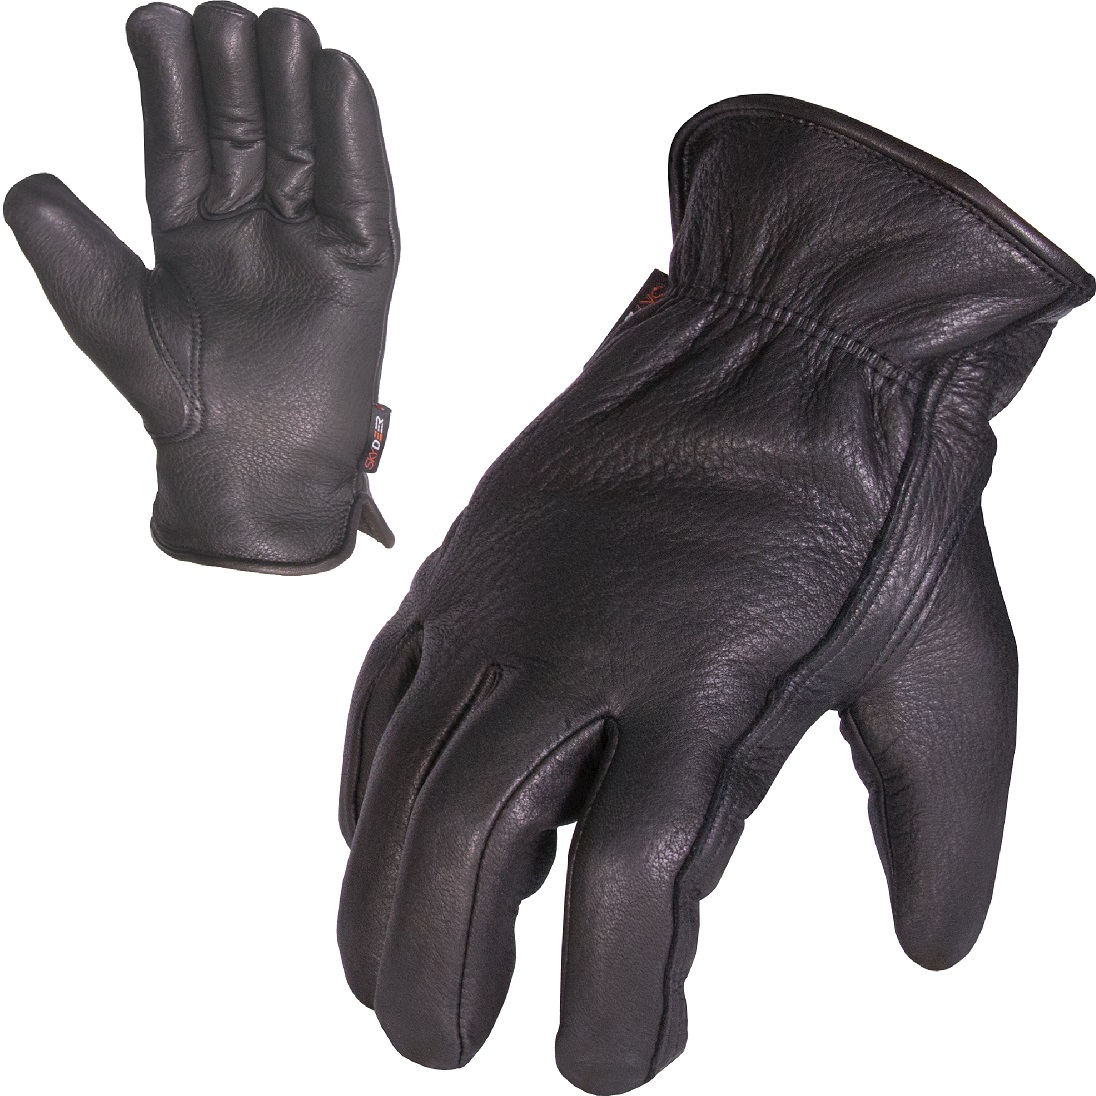 SKYDEER Armprotec Synthetic Leather WorkPRO Glove SD8809(M) (3